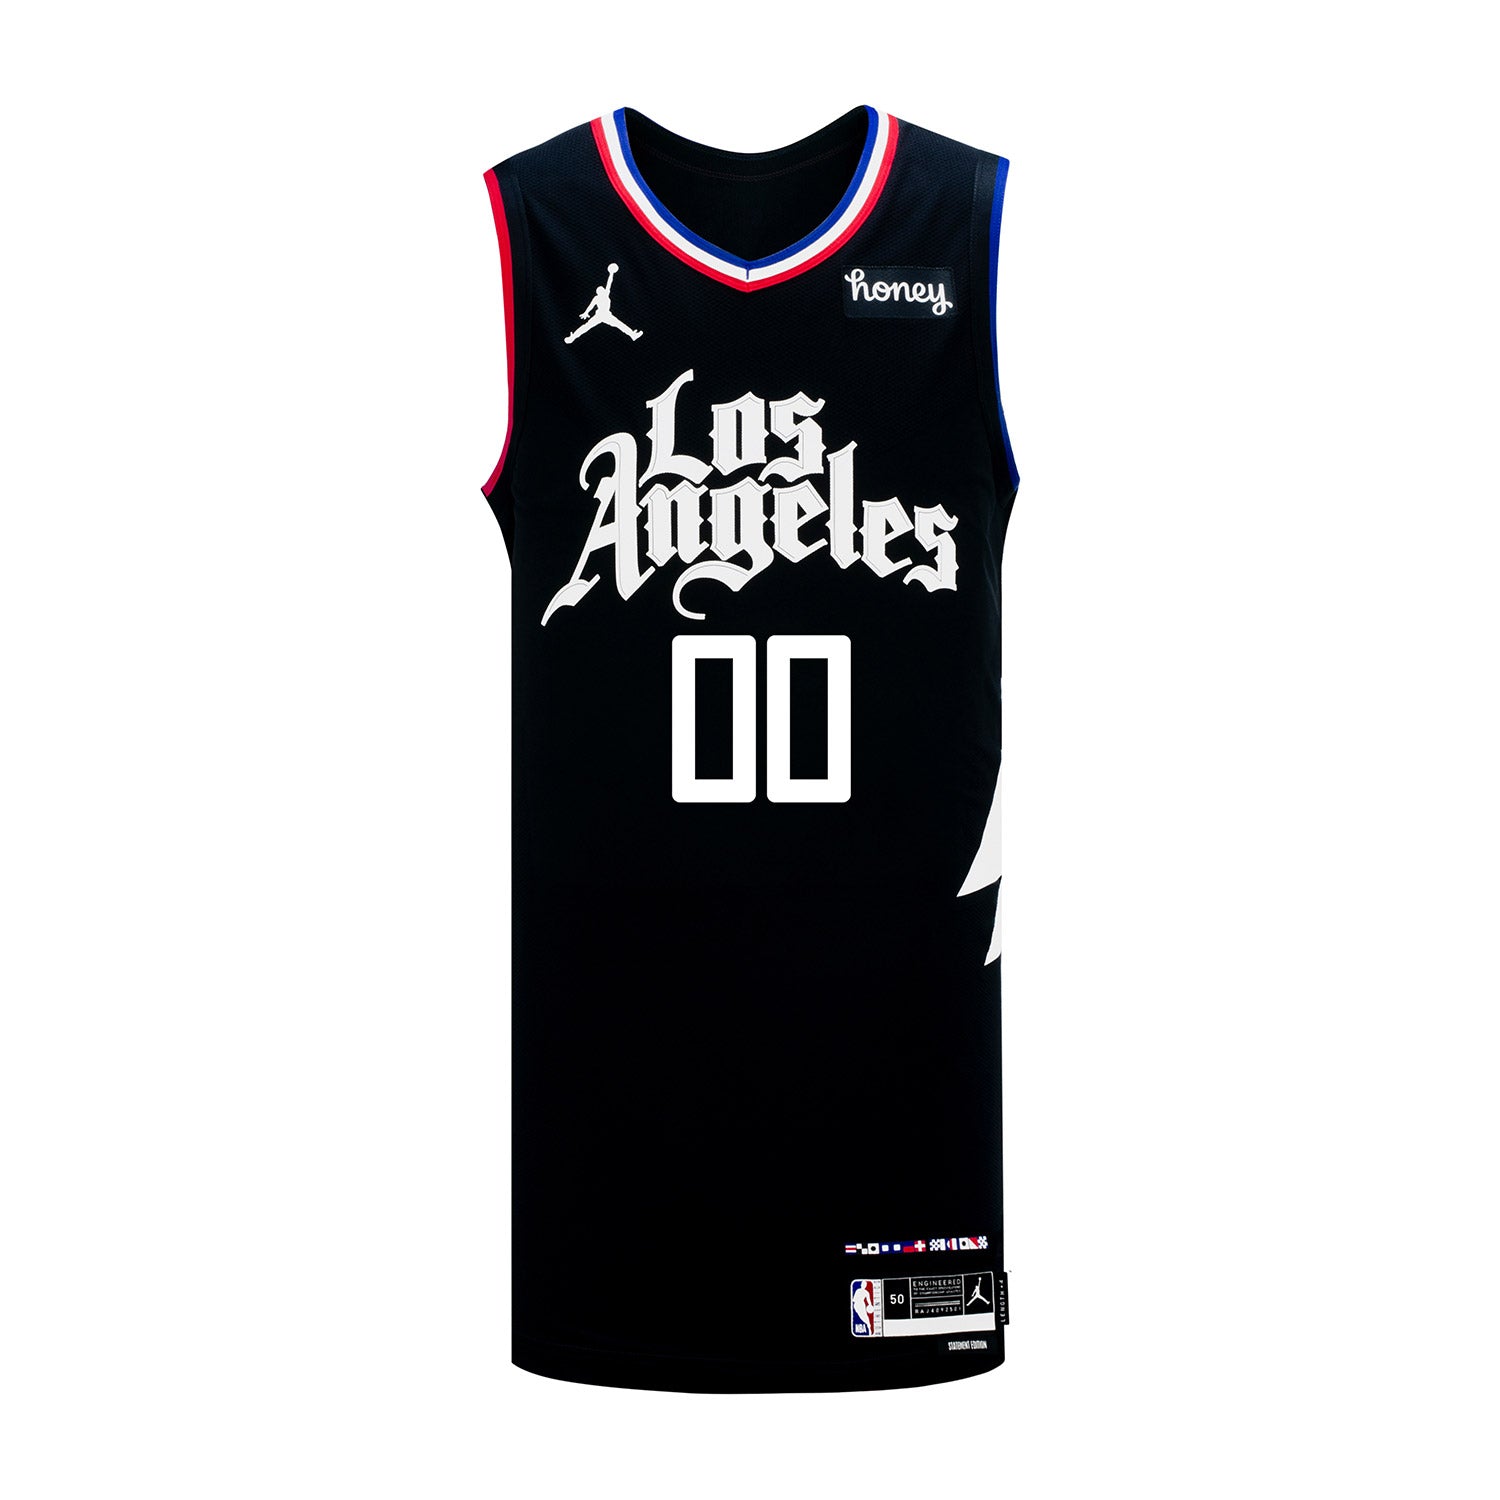 L.A. Clippers debut new special edition jersey designed by Mister Cartoon